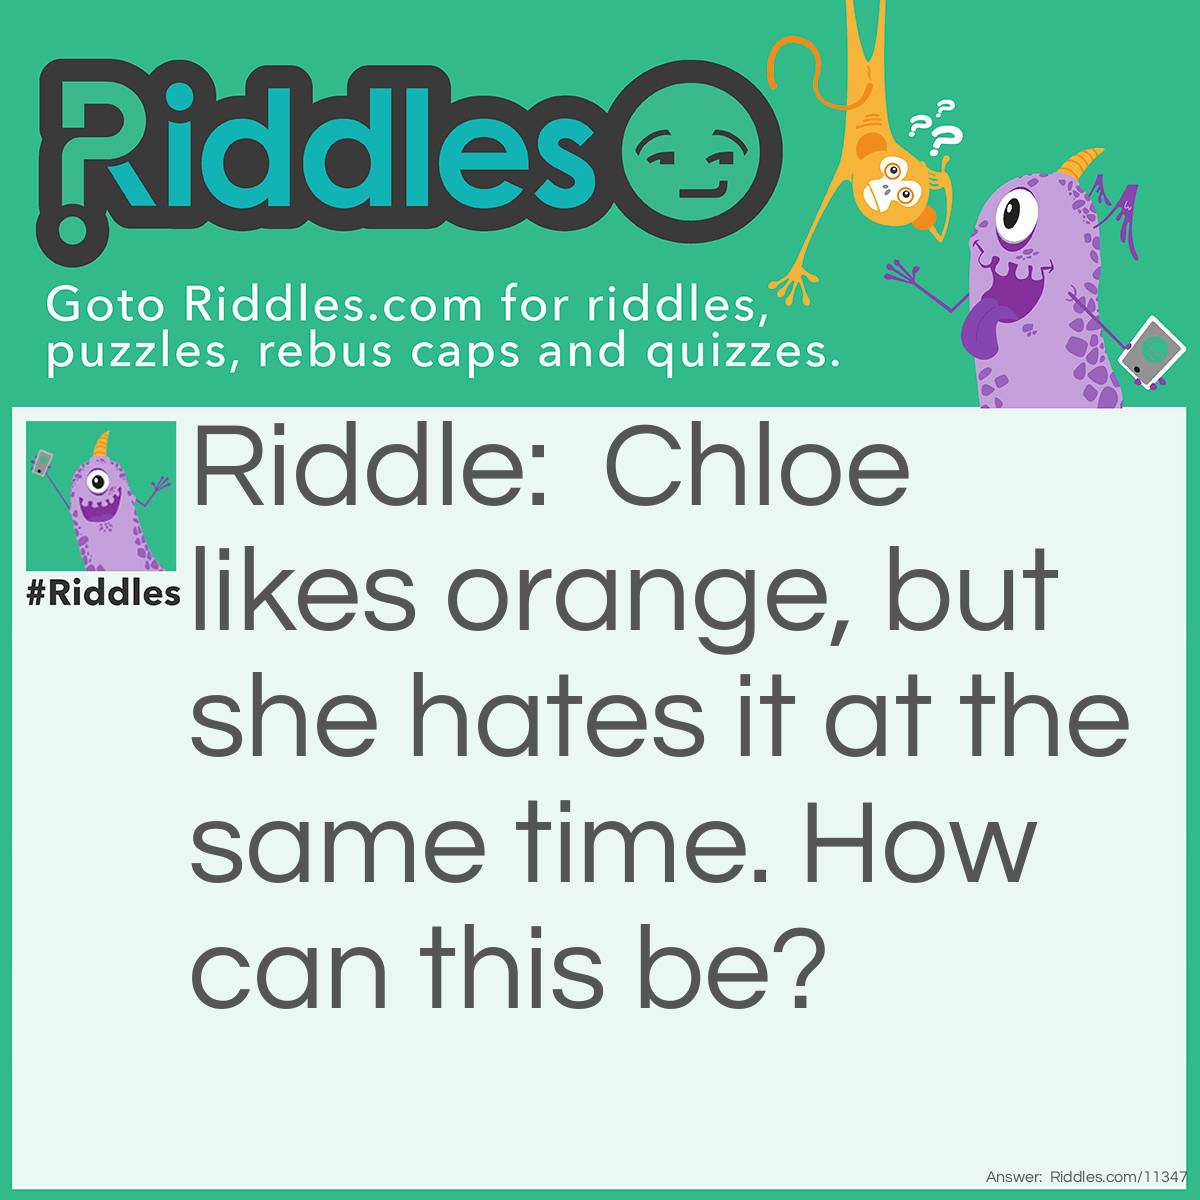 Riddle: Chloe likes orange, but she hates it at the same time. How can this be? Answer: Chloe likes the color orange, but hates orange fruit…or vice-versa (i.e. Chloe likes orange fruit, but hates the color orange).